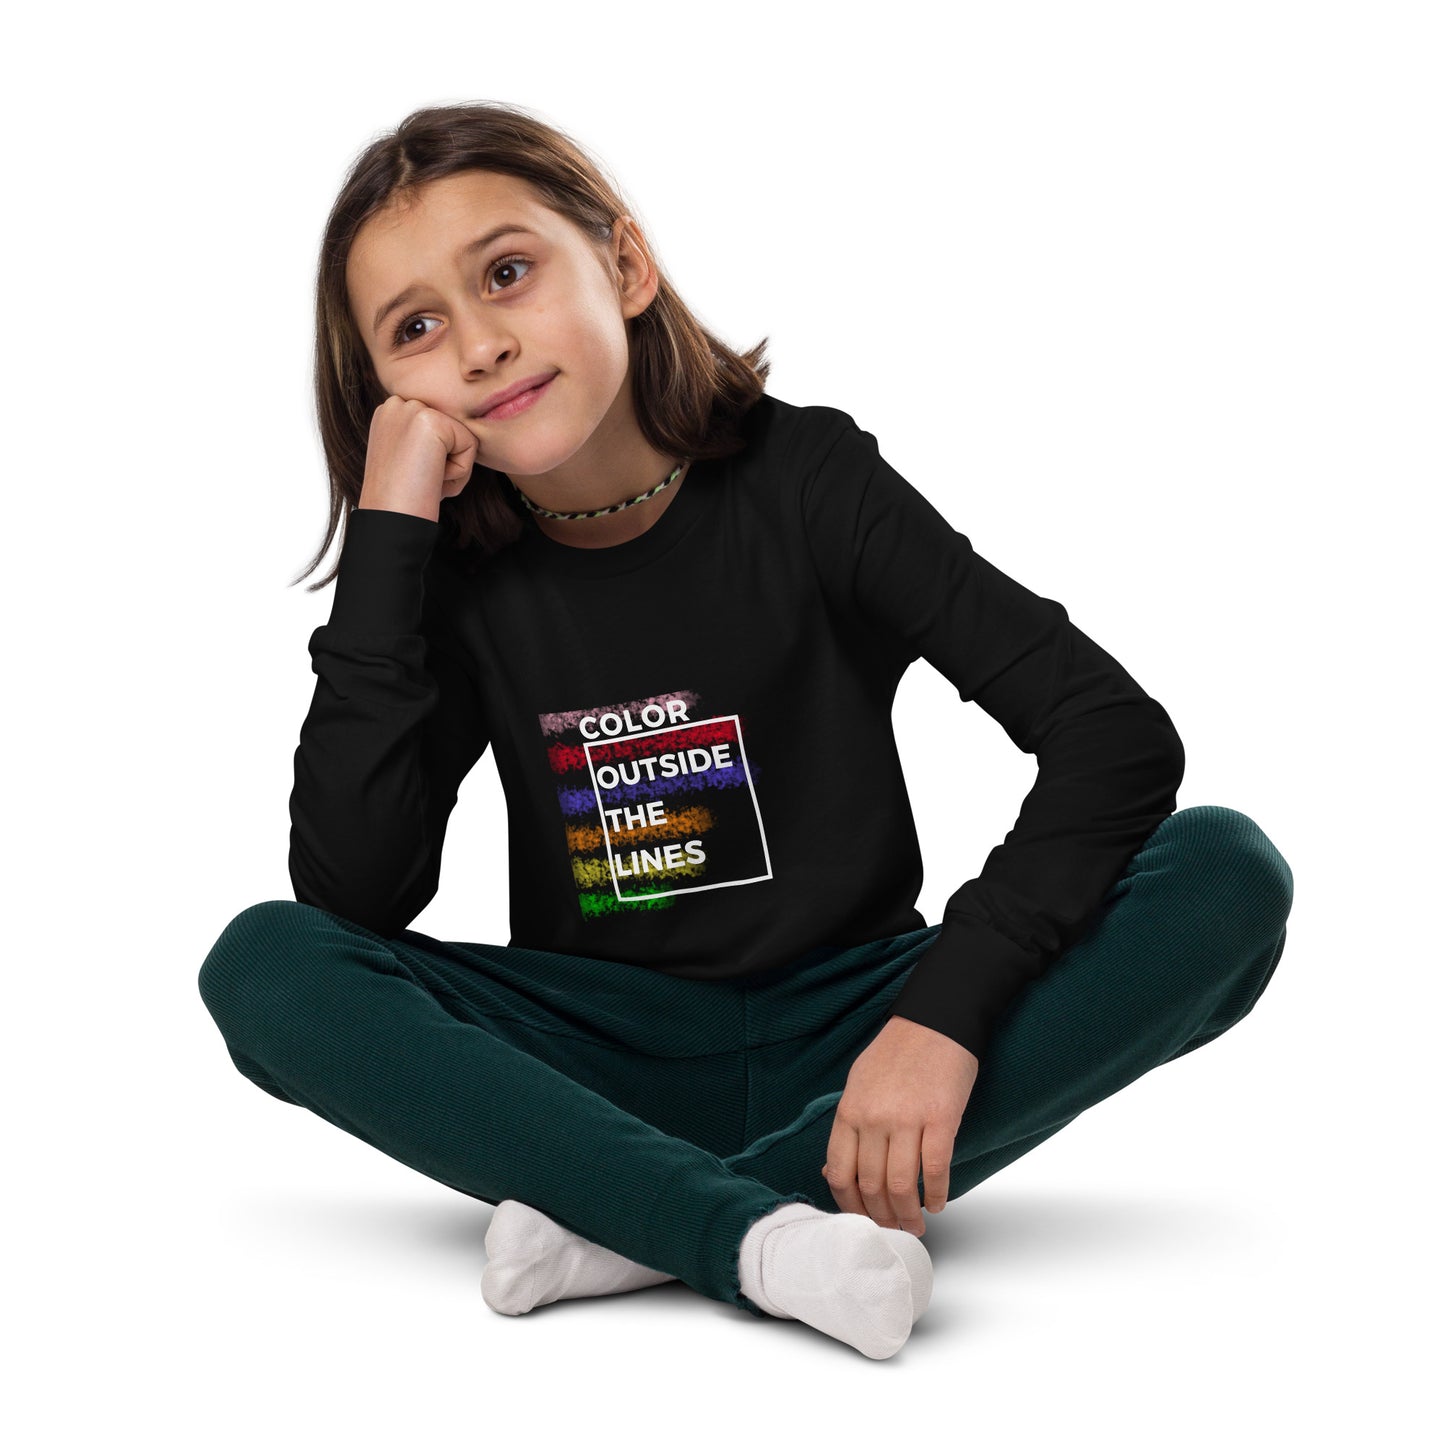 Color Outside the Lines - Youth Long Sleeve Tee